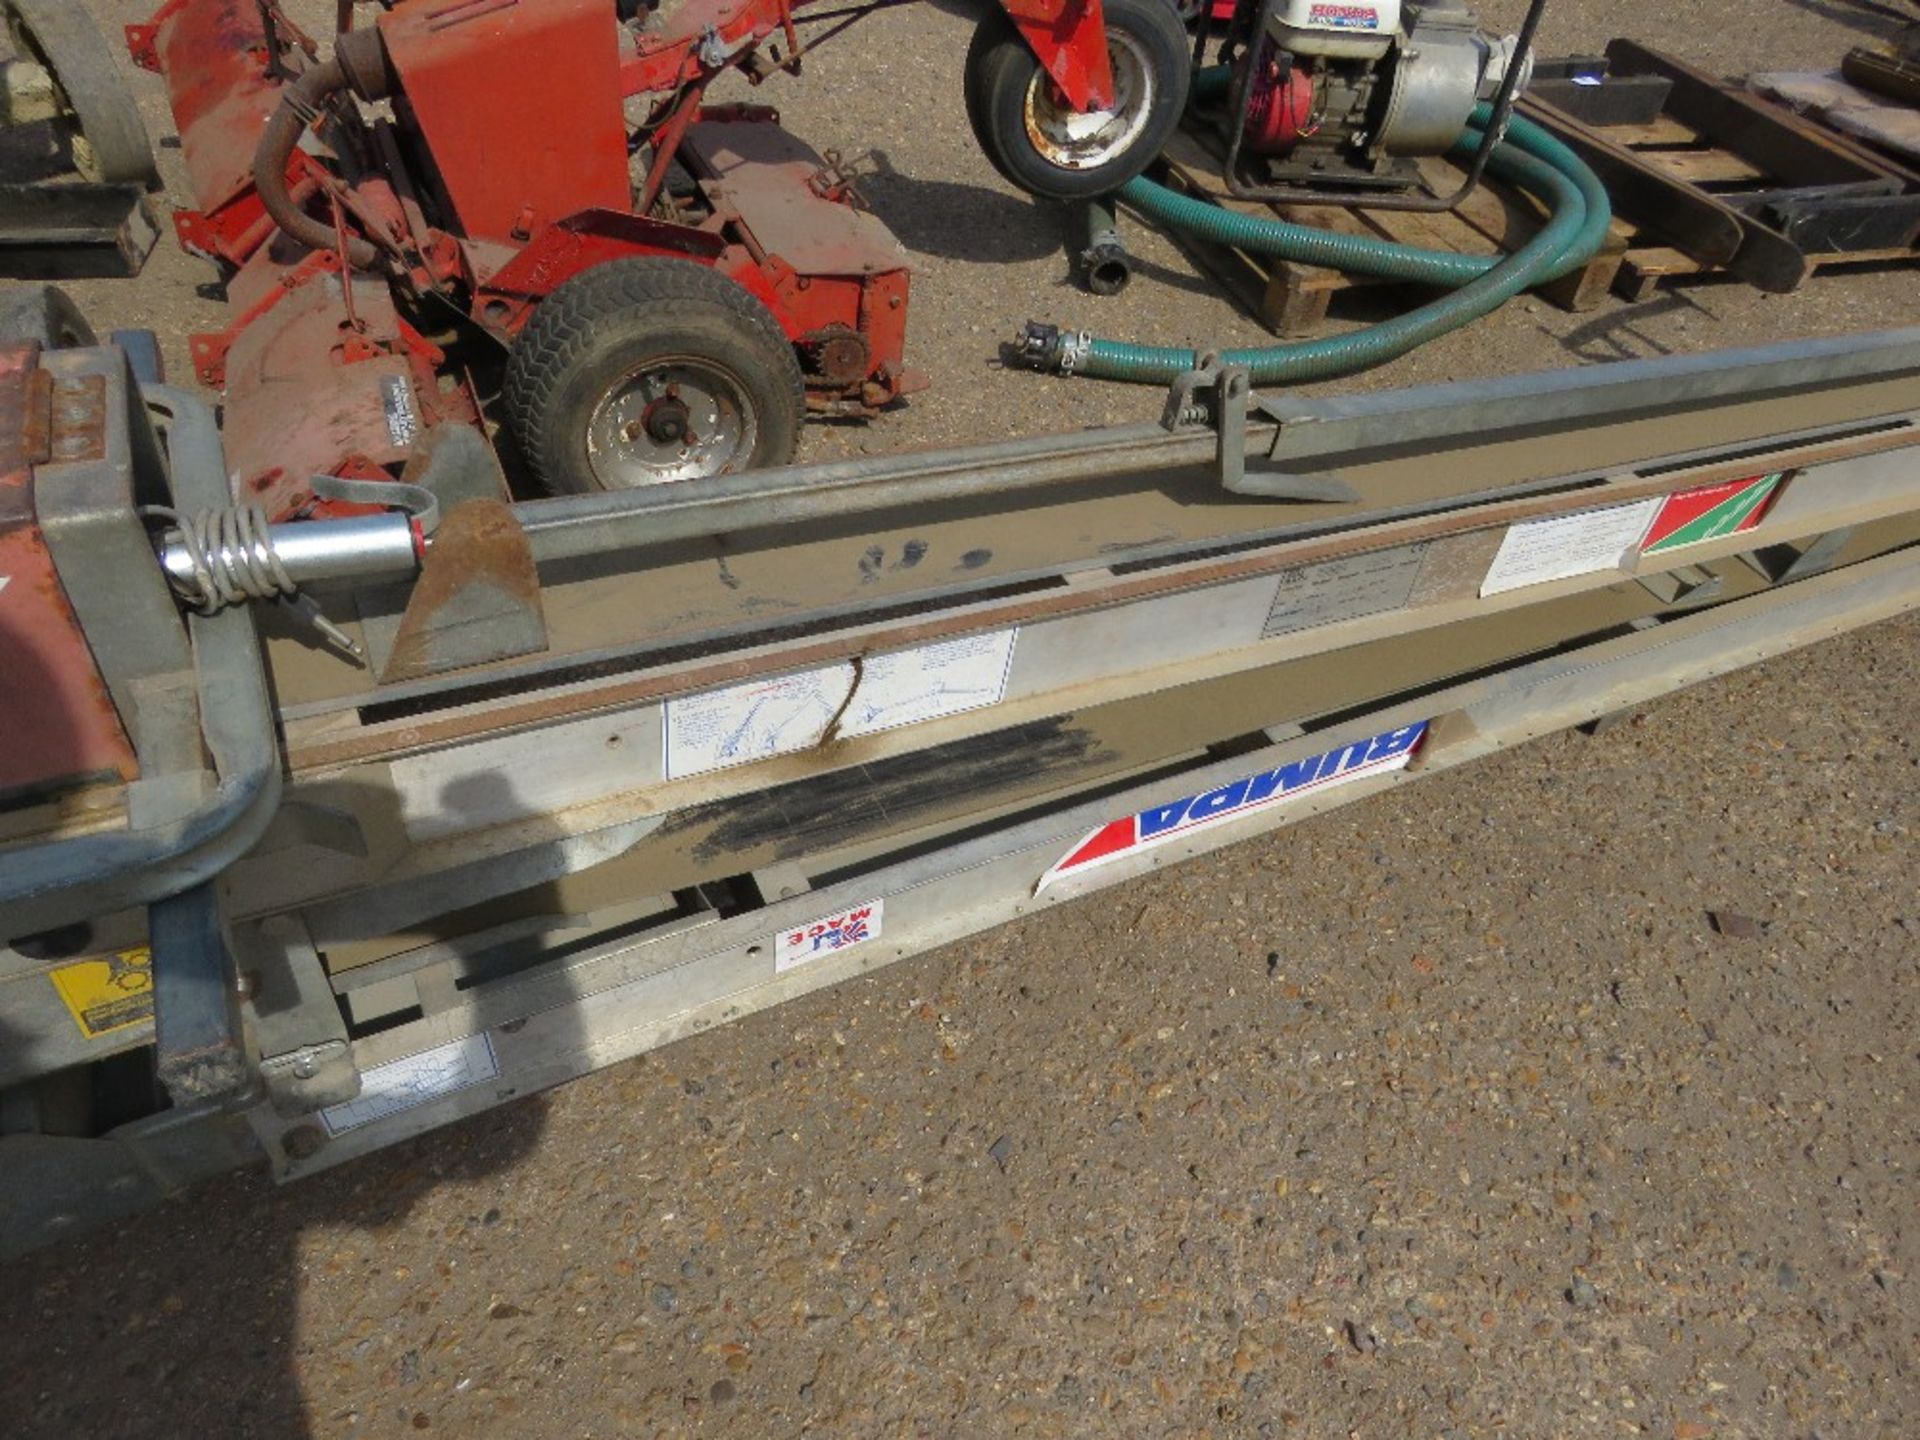 BUMPA PETROL ENGINED TILE HOIST WITH HONDA ENGINE, 32FT OVERALL LENGTH APPROX. - Image 6 of 15